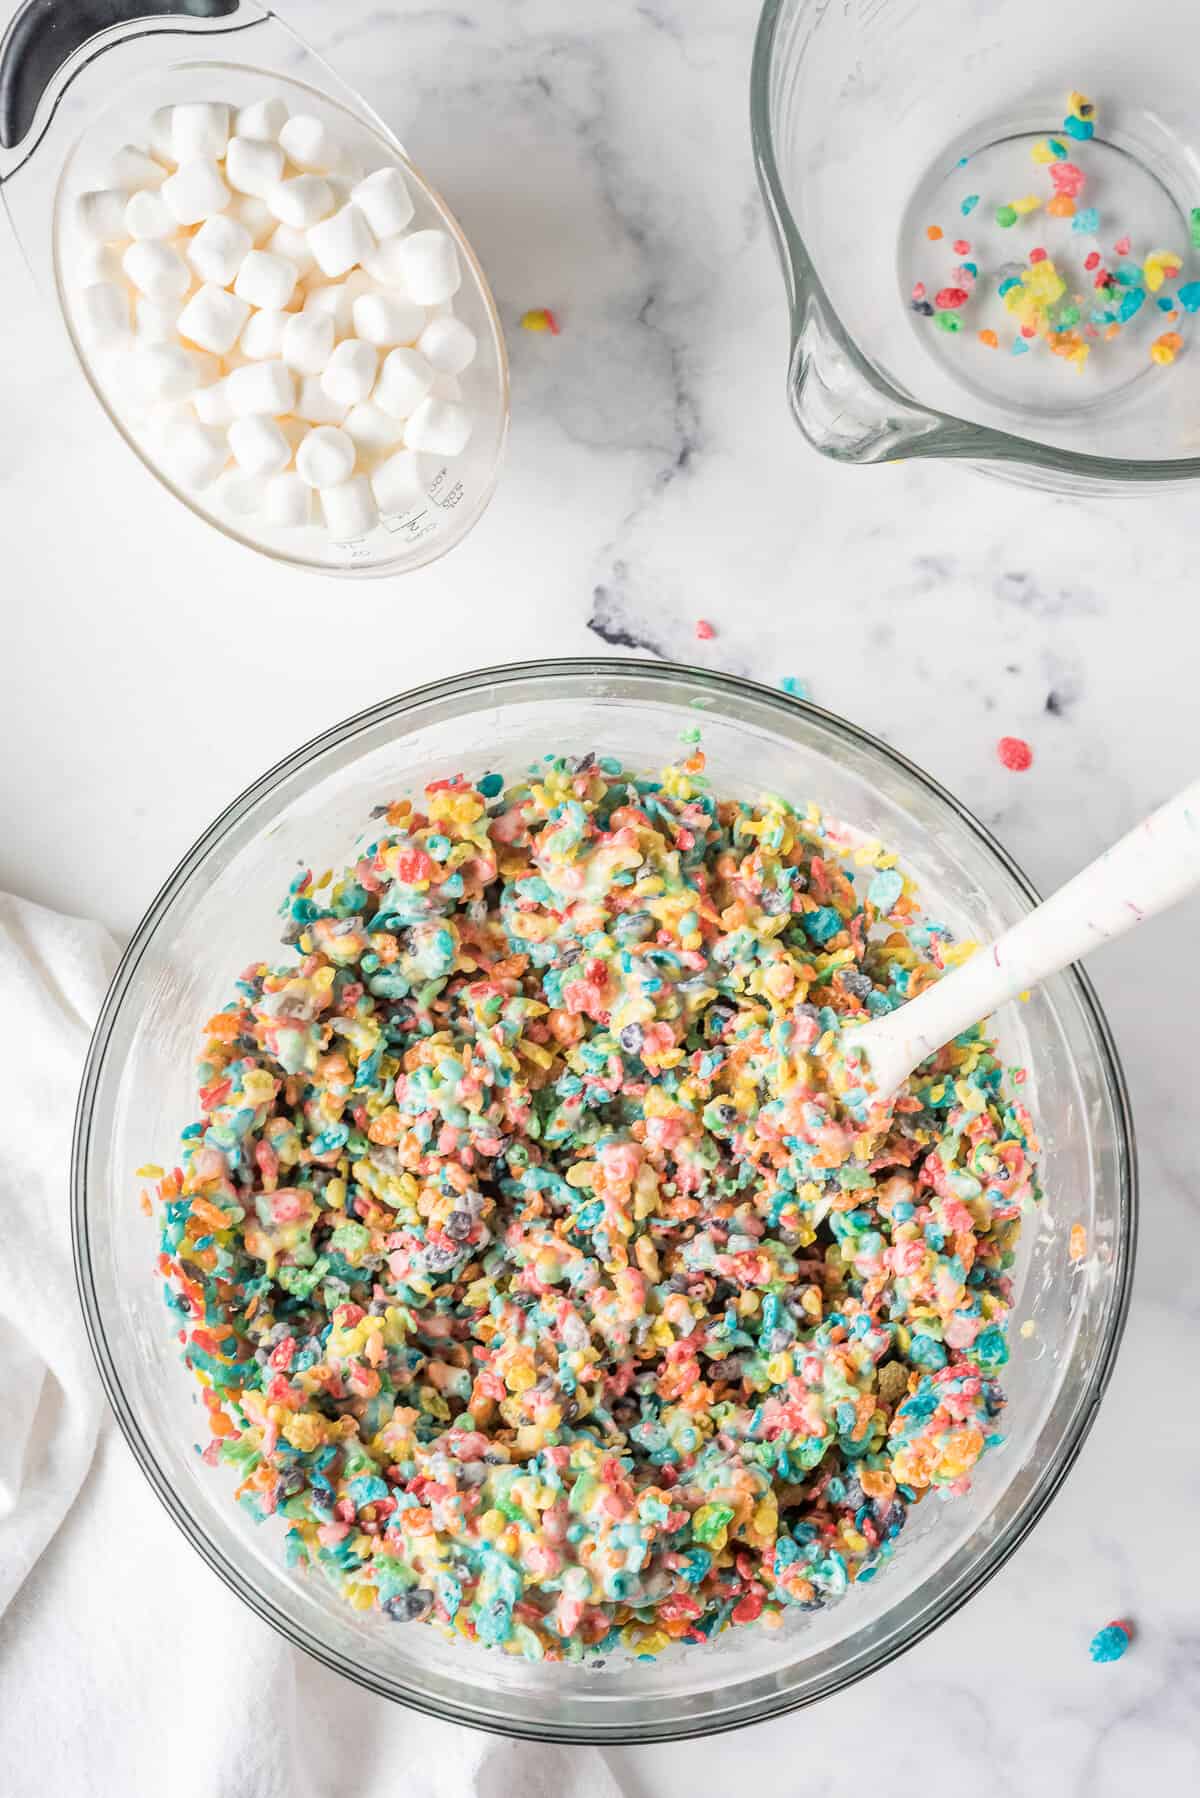 Add in the Fruity Pebbles and Mix together until fully coated with the Marshmallow mixture